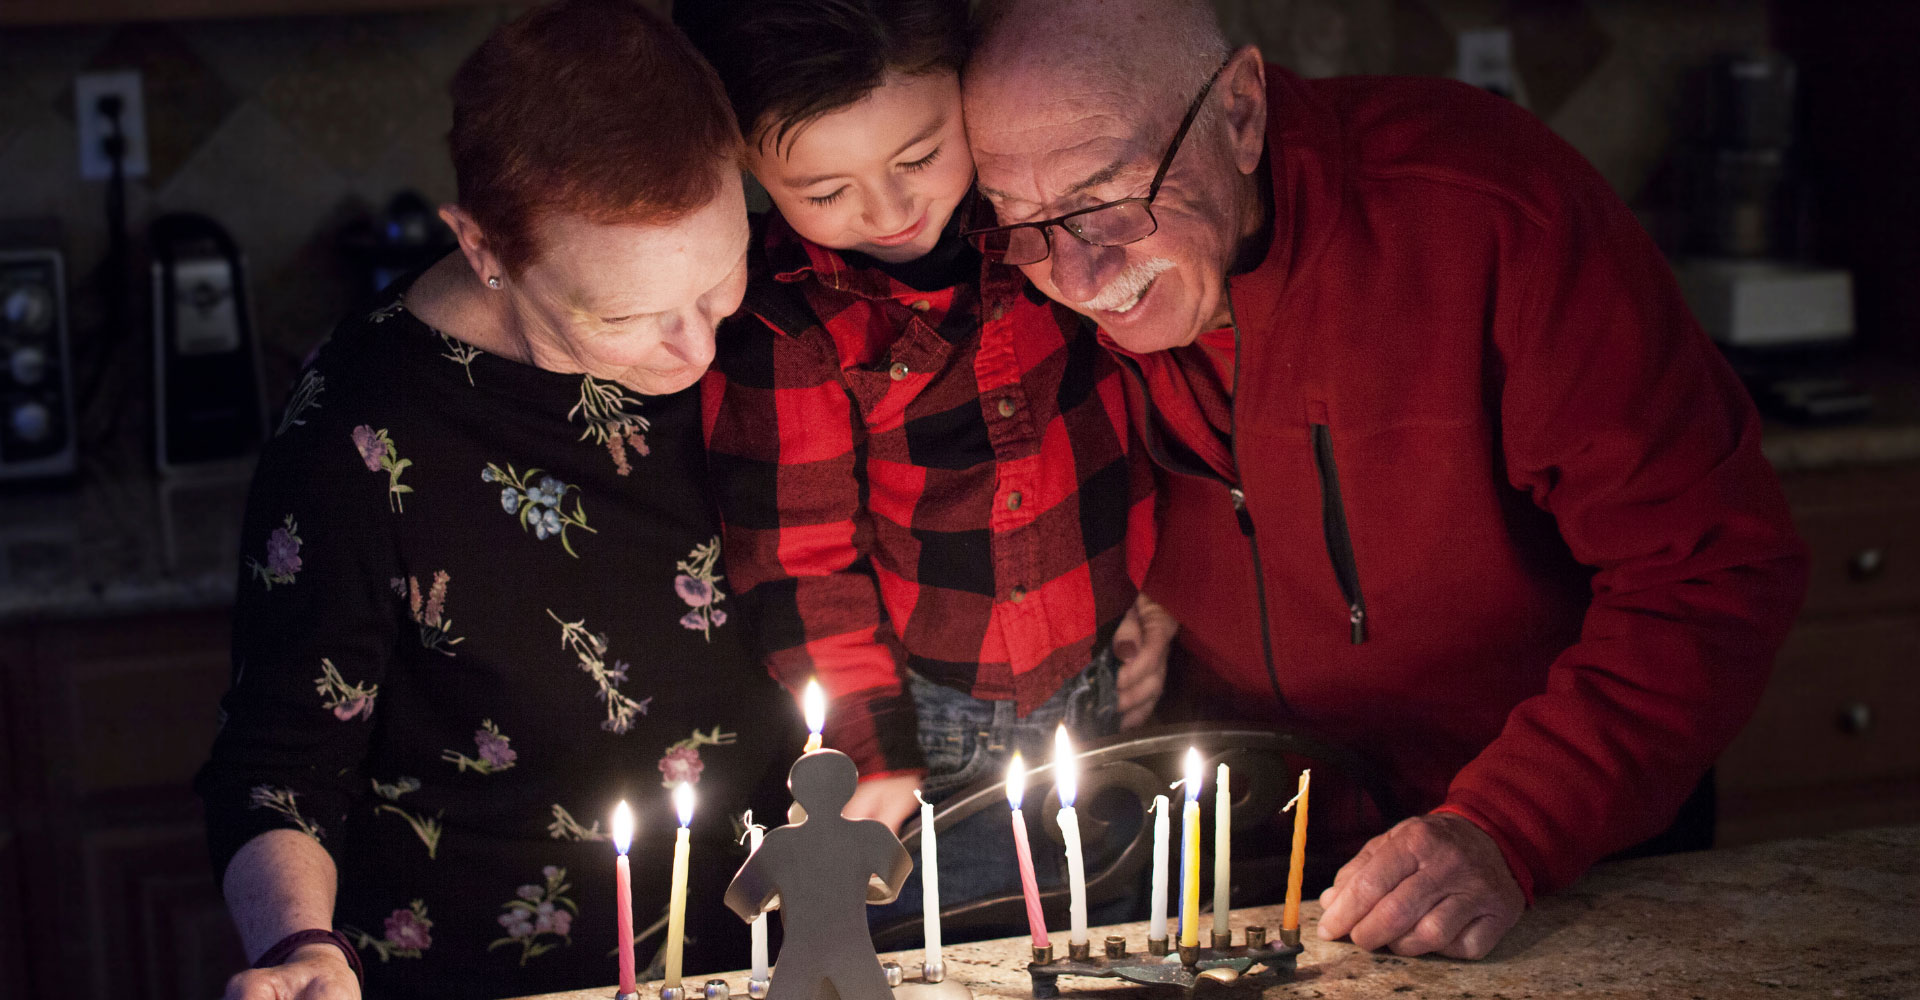 older adults and a child around a birthday cake